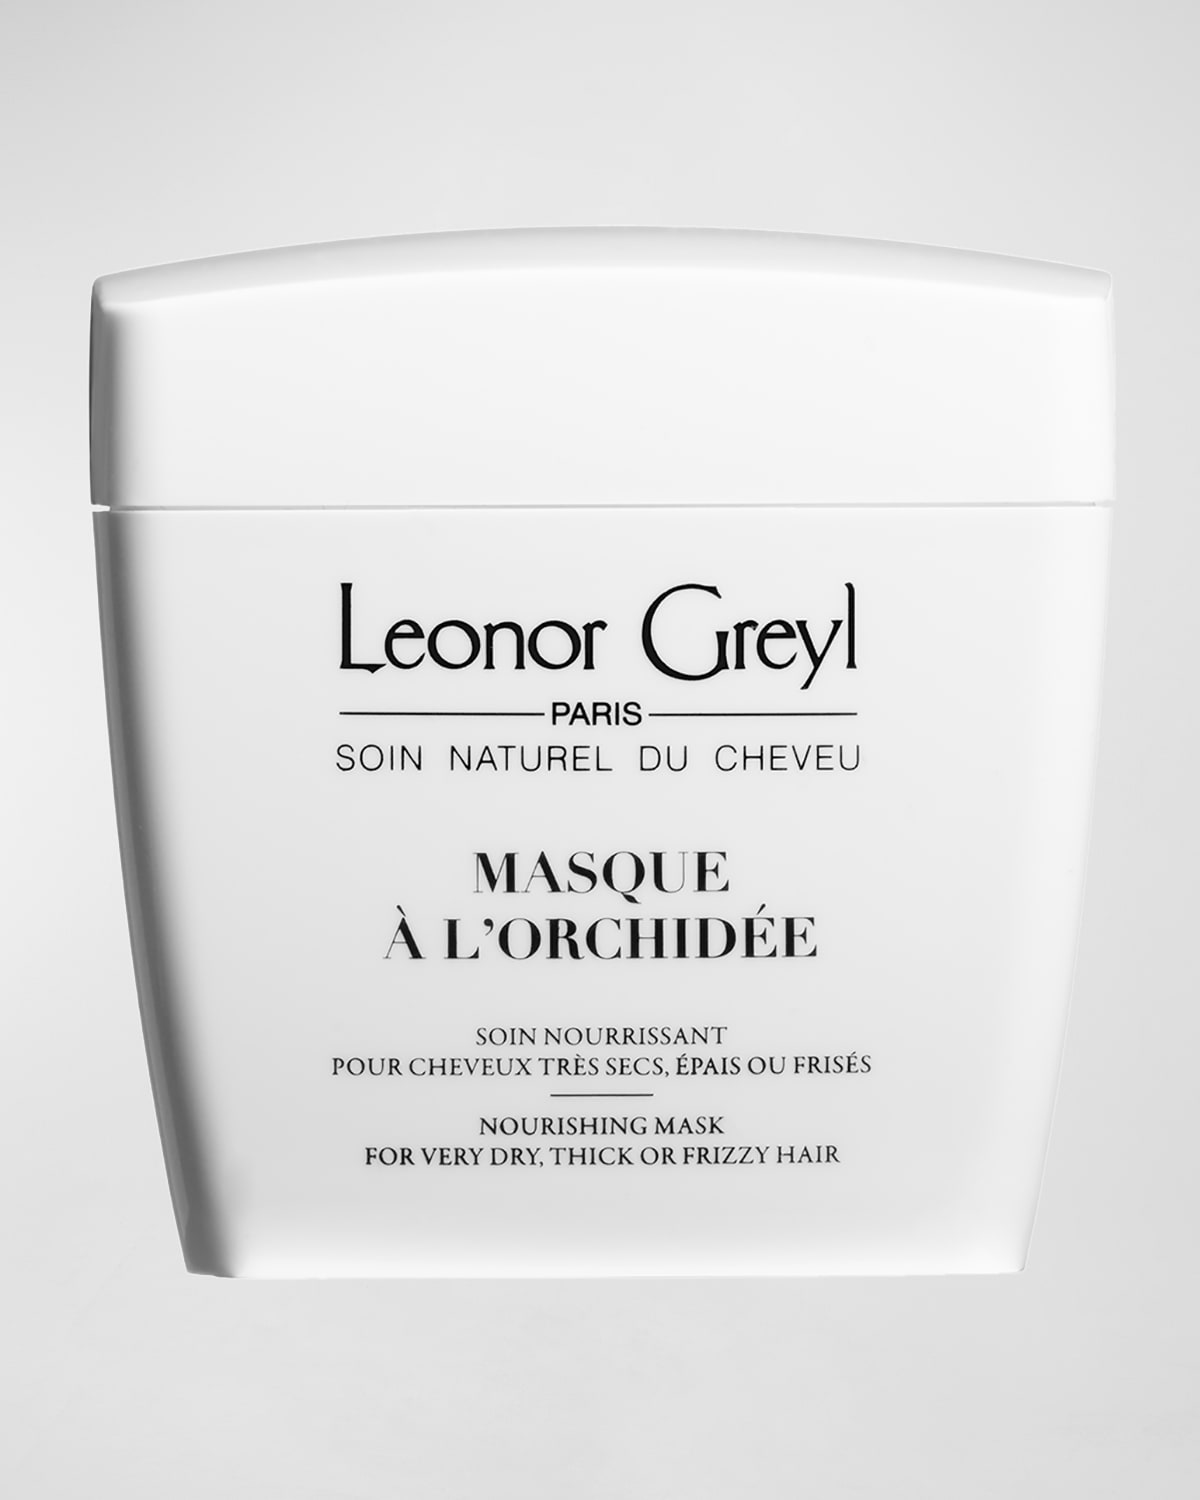 Leonor Greyl Masque a L'Orchidee (Nourishing Mask for Very Dry, Thick, or Frizzy Hair), 7.0 oz./ 200 mL